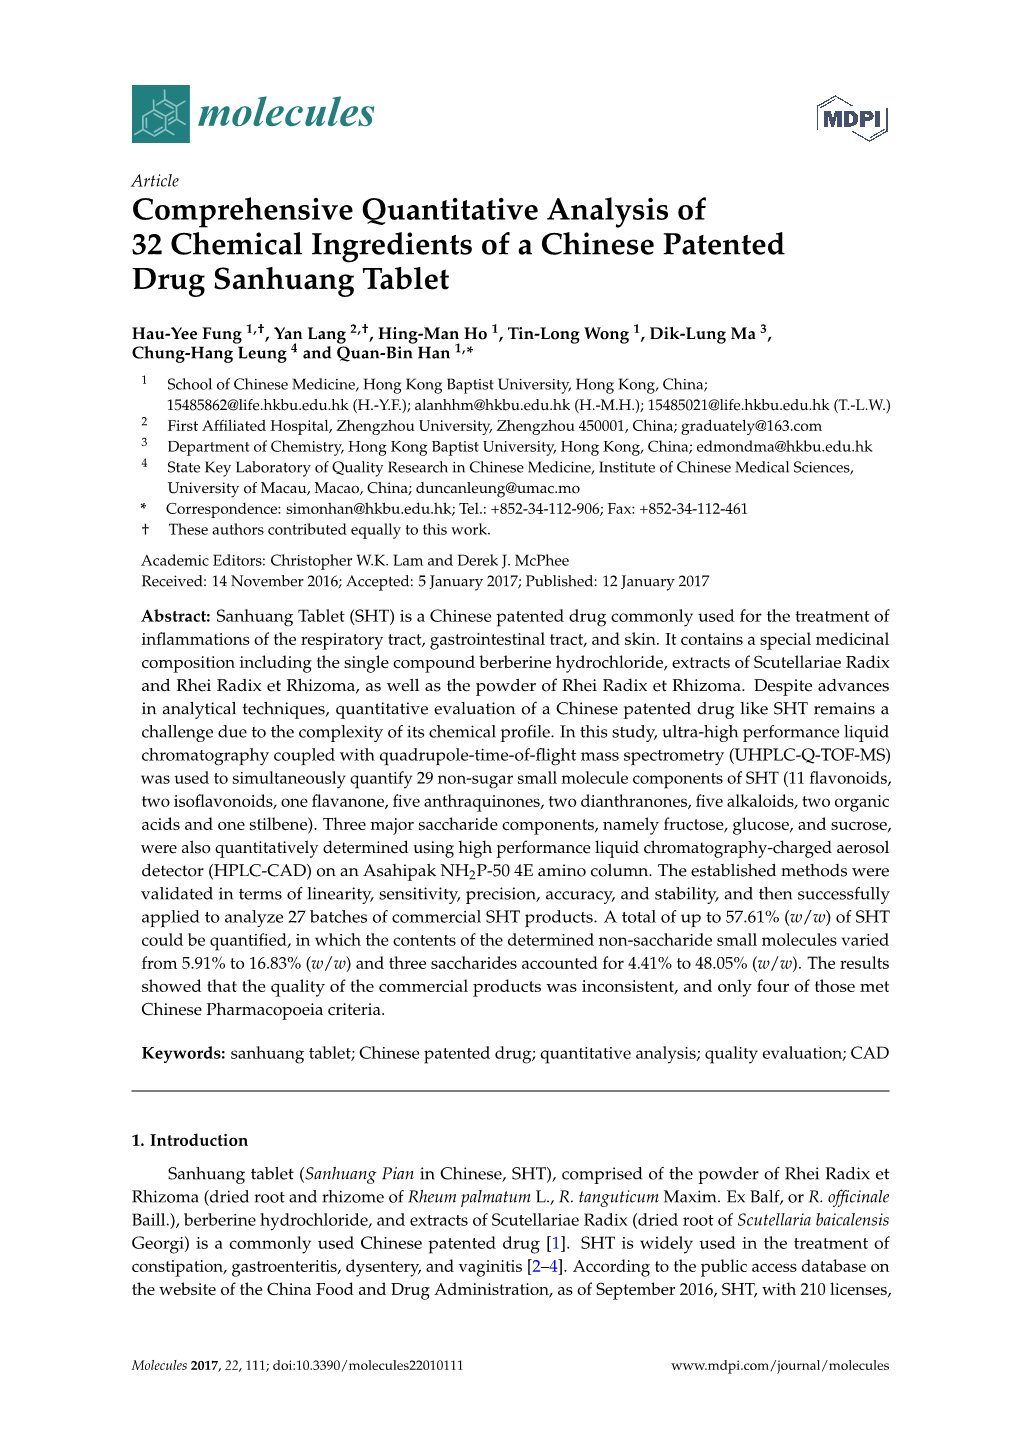 Comprehensive Quantitative Analysis of 32 Chemical Ingredients of a Chinese Patented Drug Sanhuang Tablet